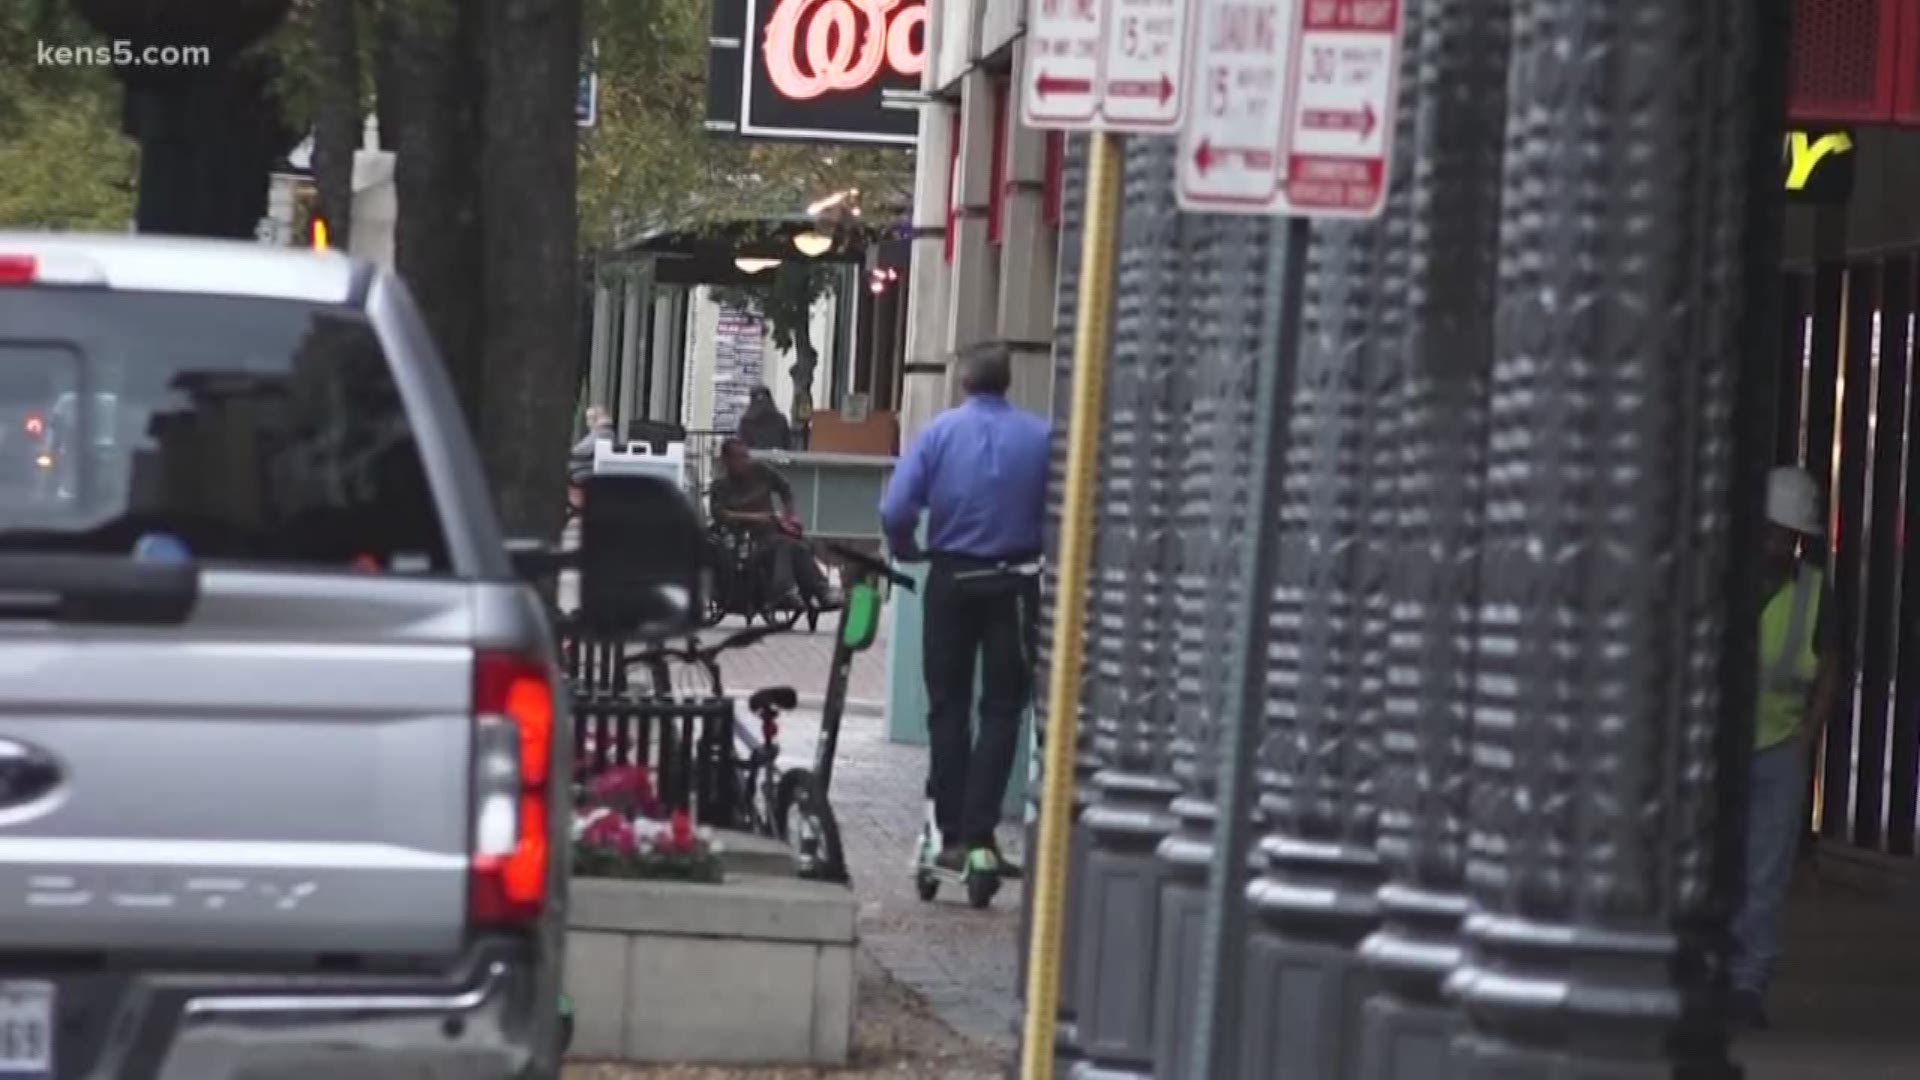 City officials are continuing to urge people to ride e-scooters safely following an early-morning incident that landed one man in the hospital. Roxie Bustamante reports on the six-month program the city is launching to improve rider safety.